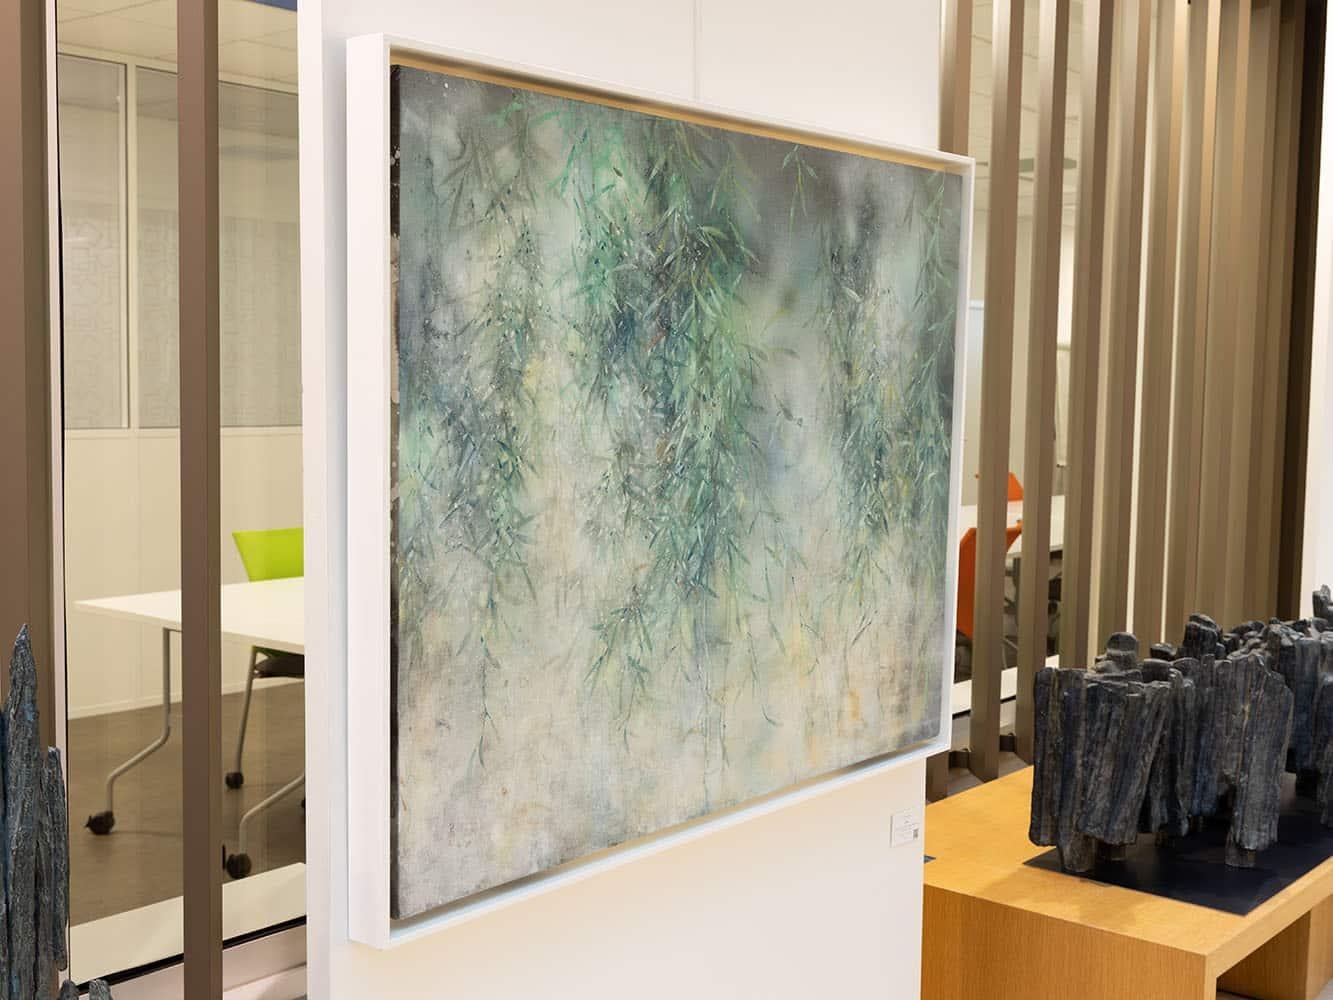 Blast is a unique painting by contemporary artist Yiching Chen. The painting is made with mineral pigments on Japanese paper mounted on wood, dimensions are 85 × 110 cm (33.5 × 43.3 in). Dimensions of the framed artwork are 90 x 115 cm (35.4 x 45.2